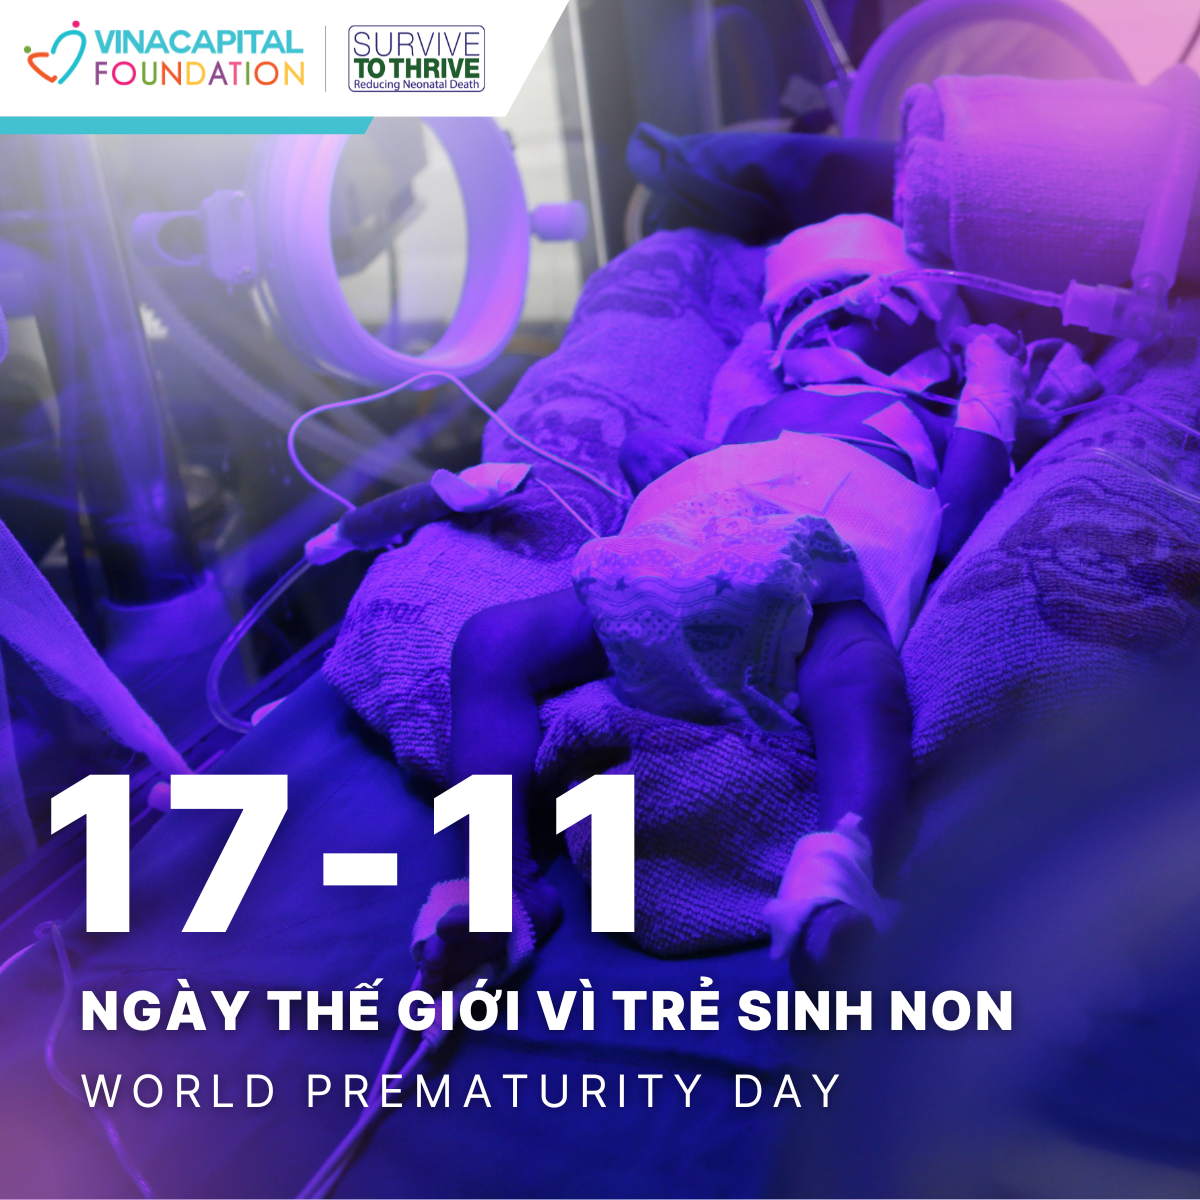 Protecting the lives of premature infants in the mountainous regions of northwest Vietnam